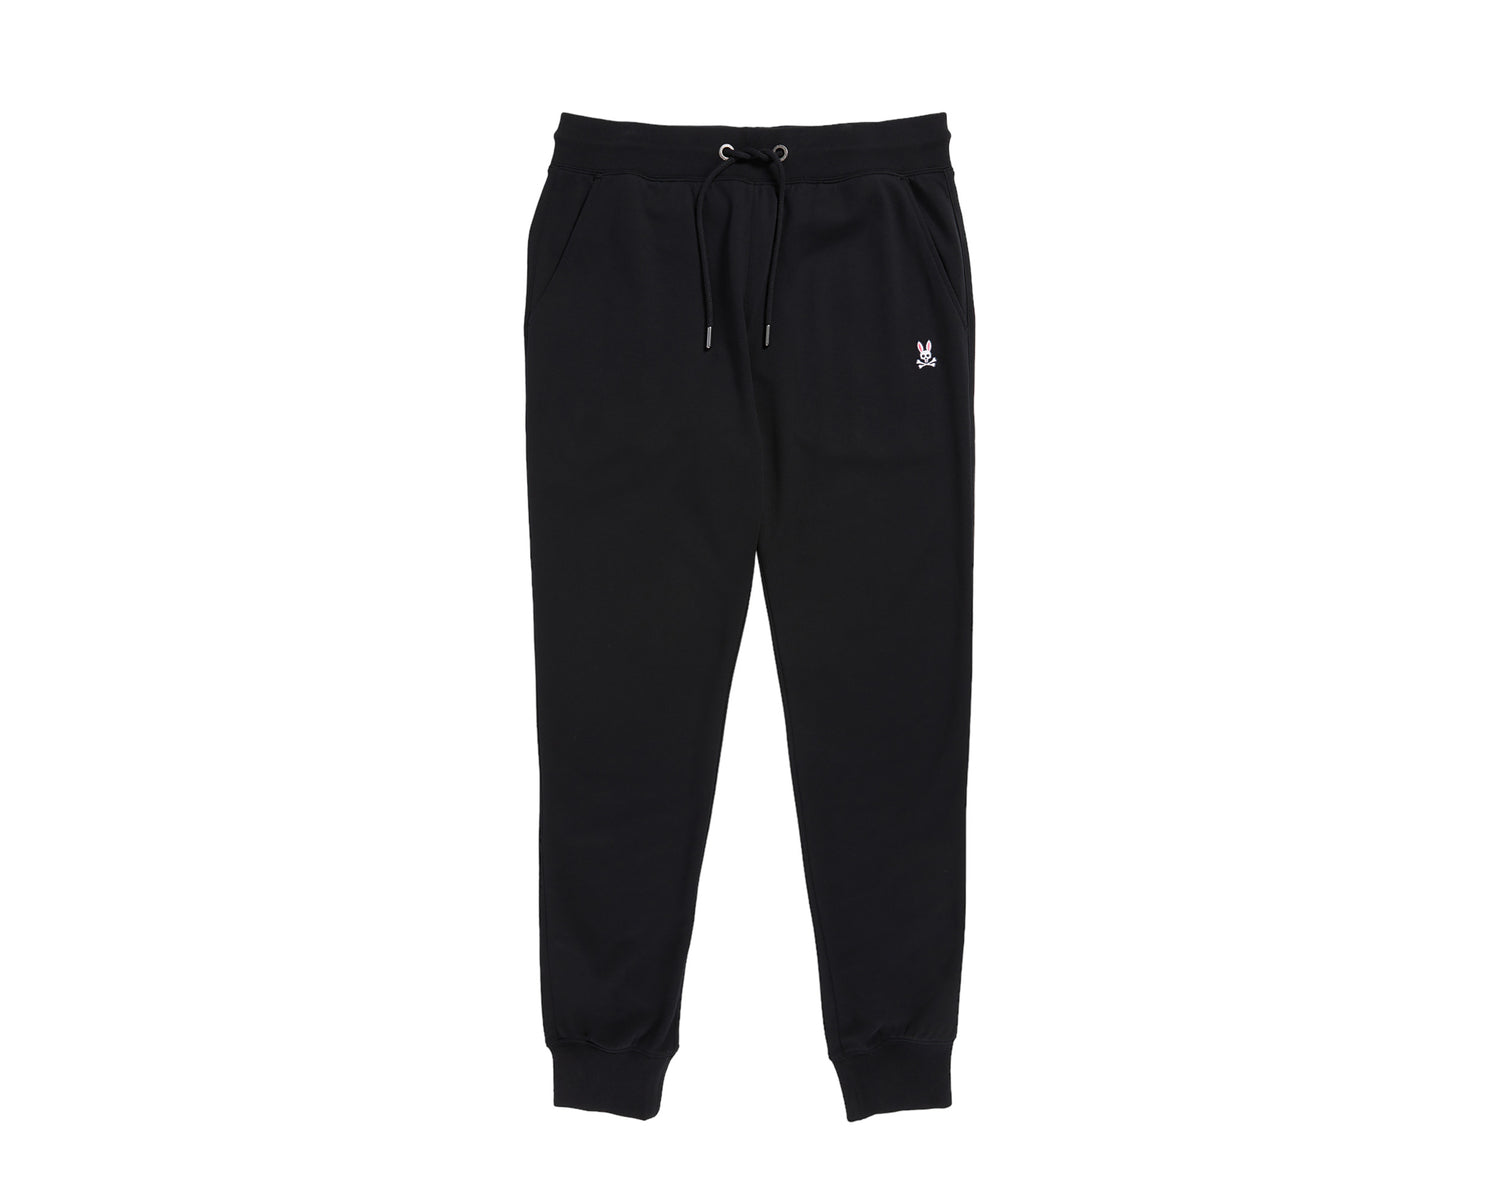 Psycho Bunny French Terry Knit Men's Sweatpants